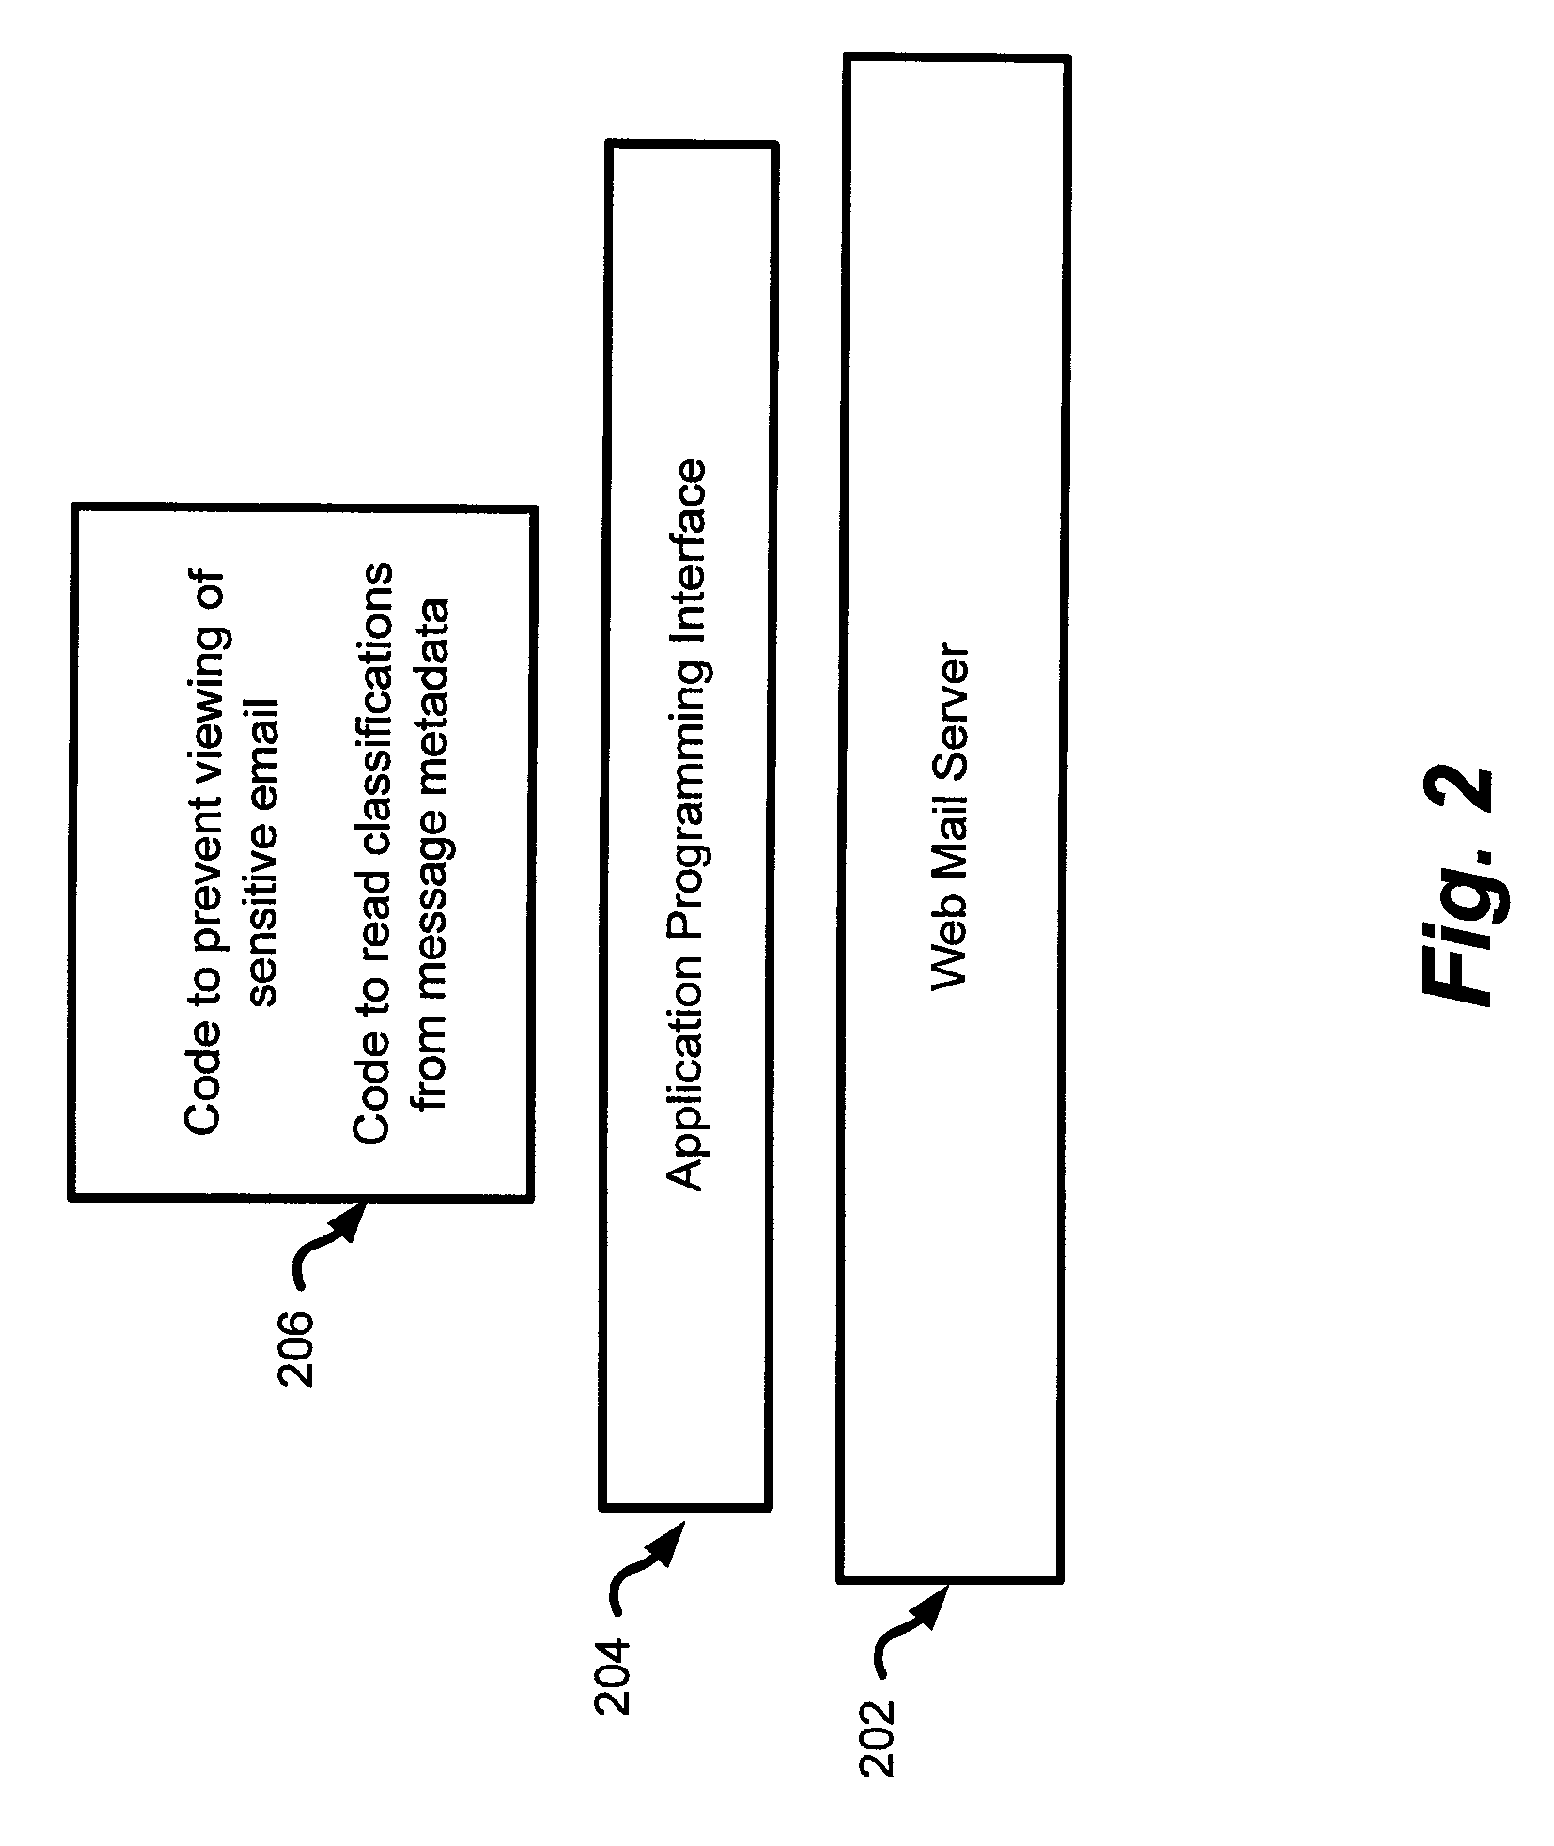 Method and system for E-mail management of E-mail having embedded classification metadata